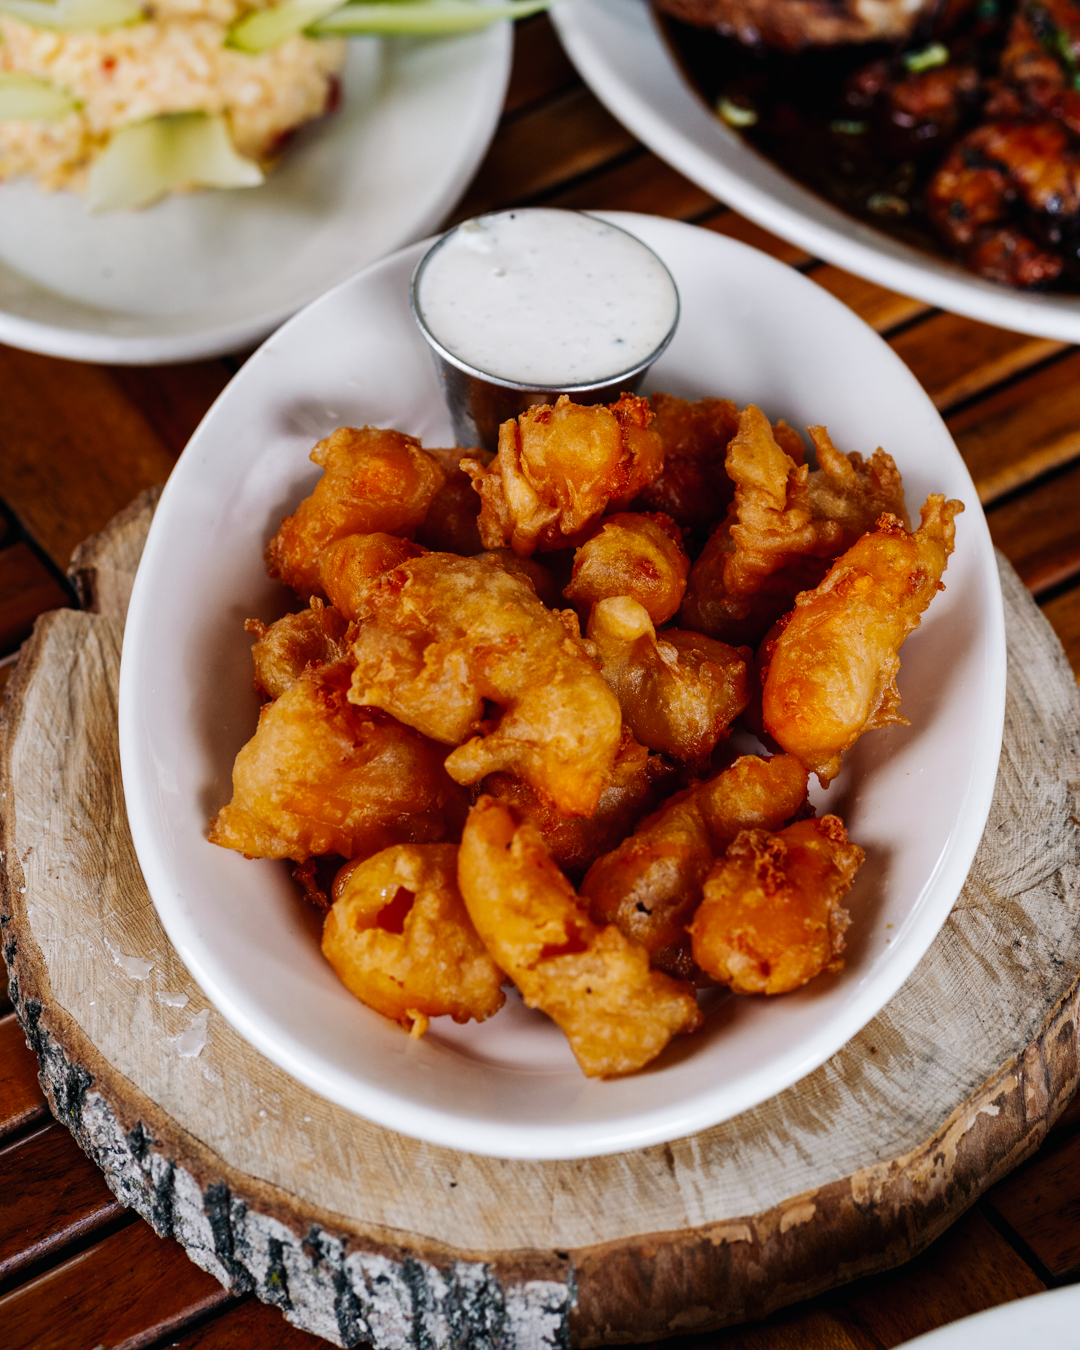 A bowl full of golden fried cheese curds.